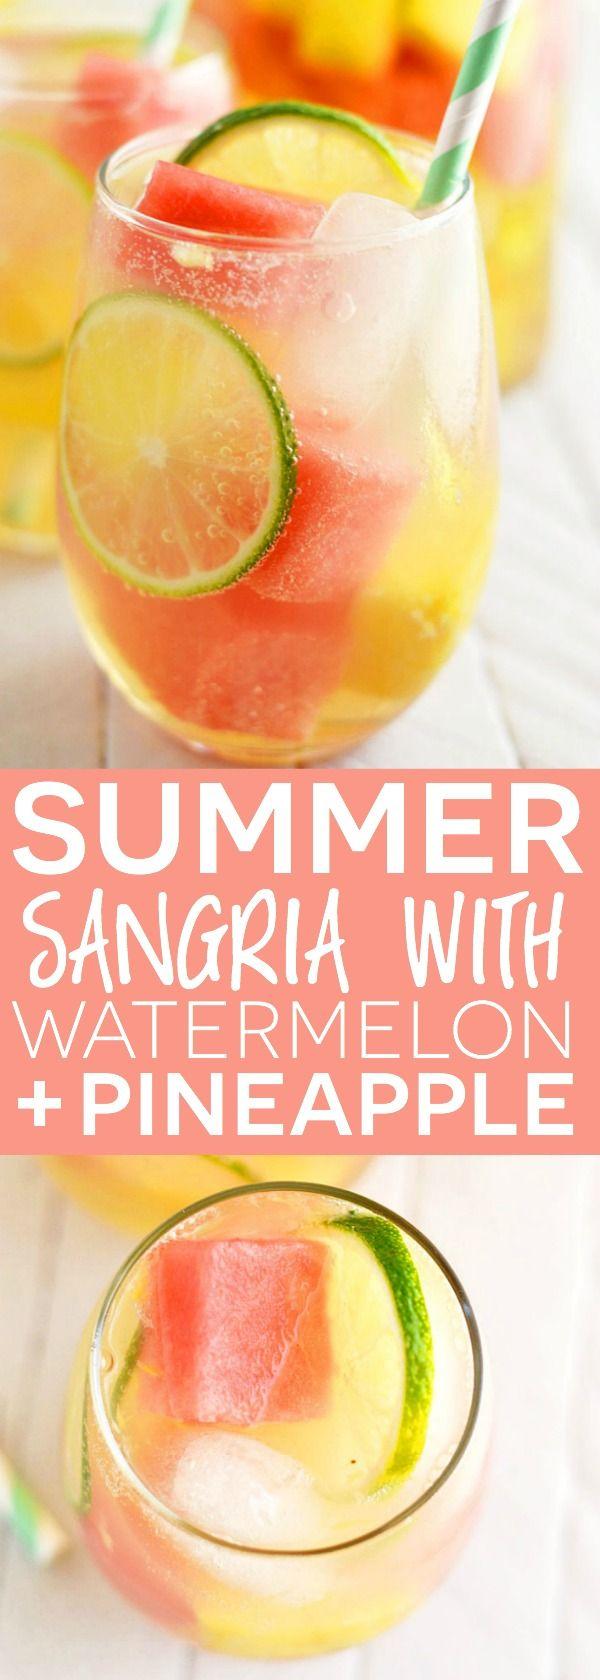 Wedding - Summer Sangria With Watermelon And Pineapple